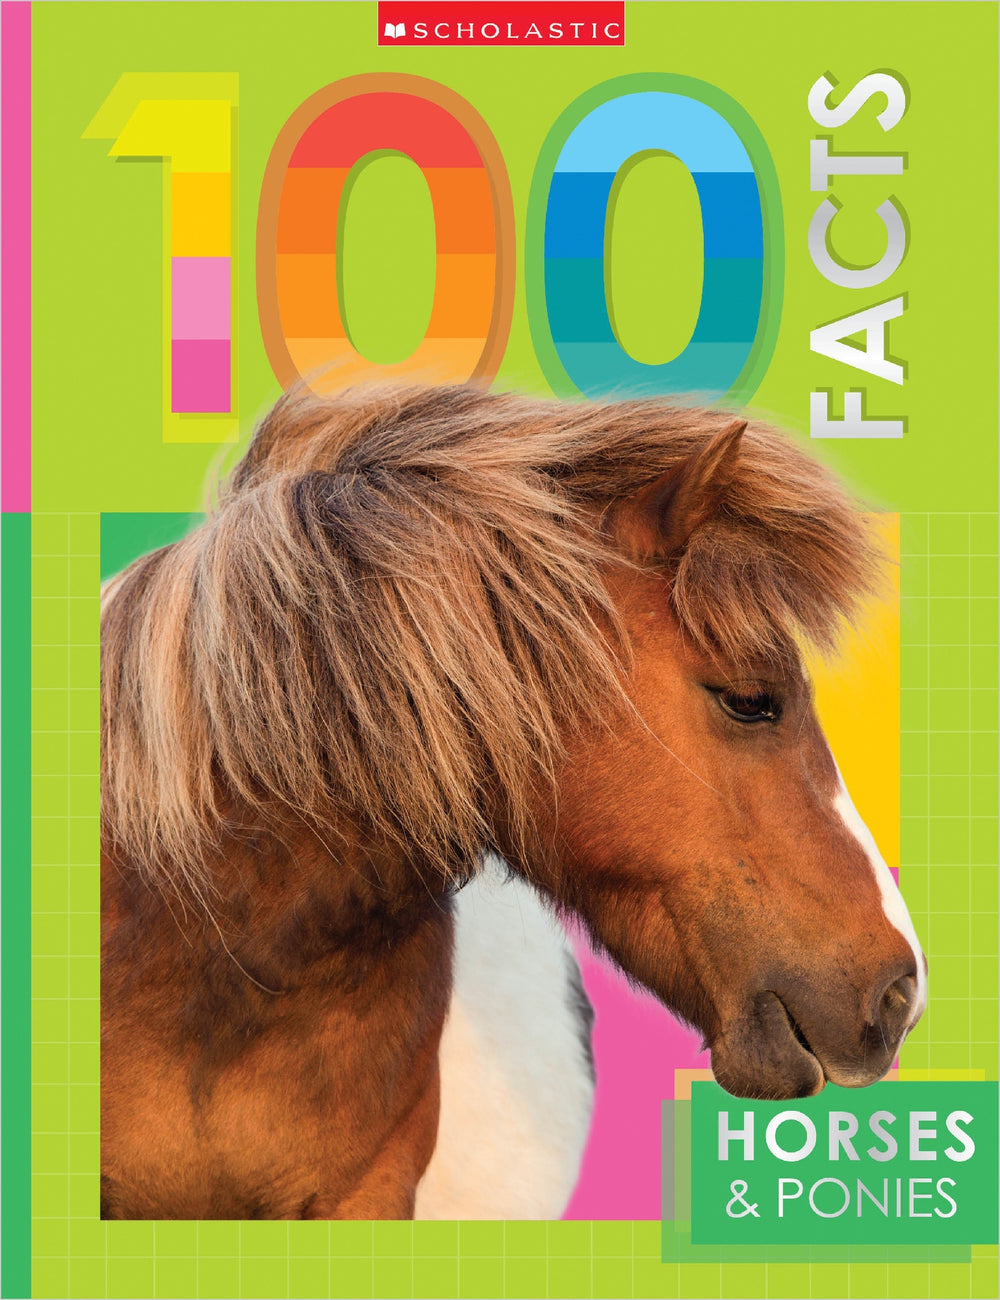 Horses and Ponies: 100 Facts (Miles Kelly)